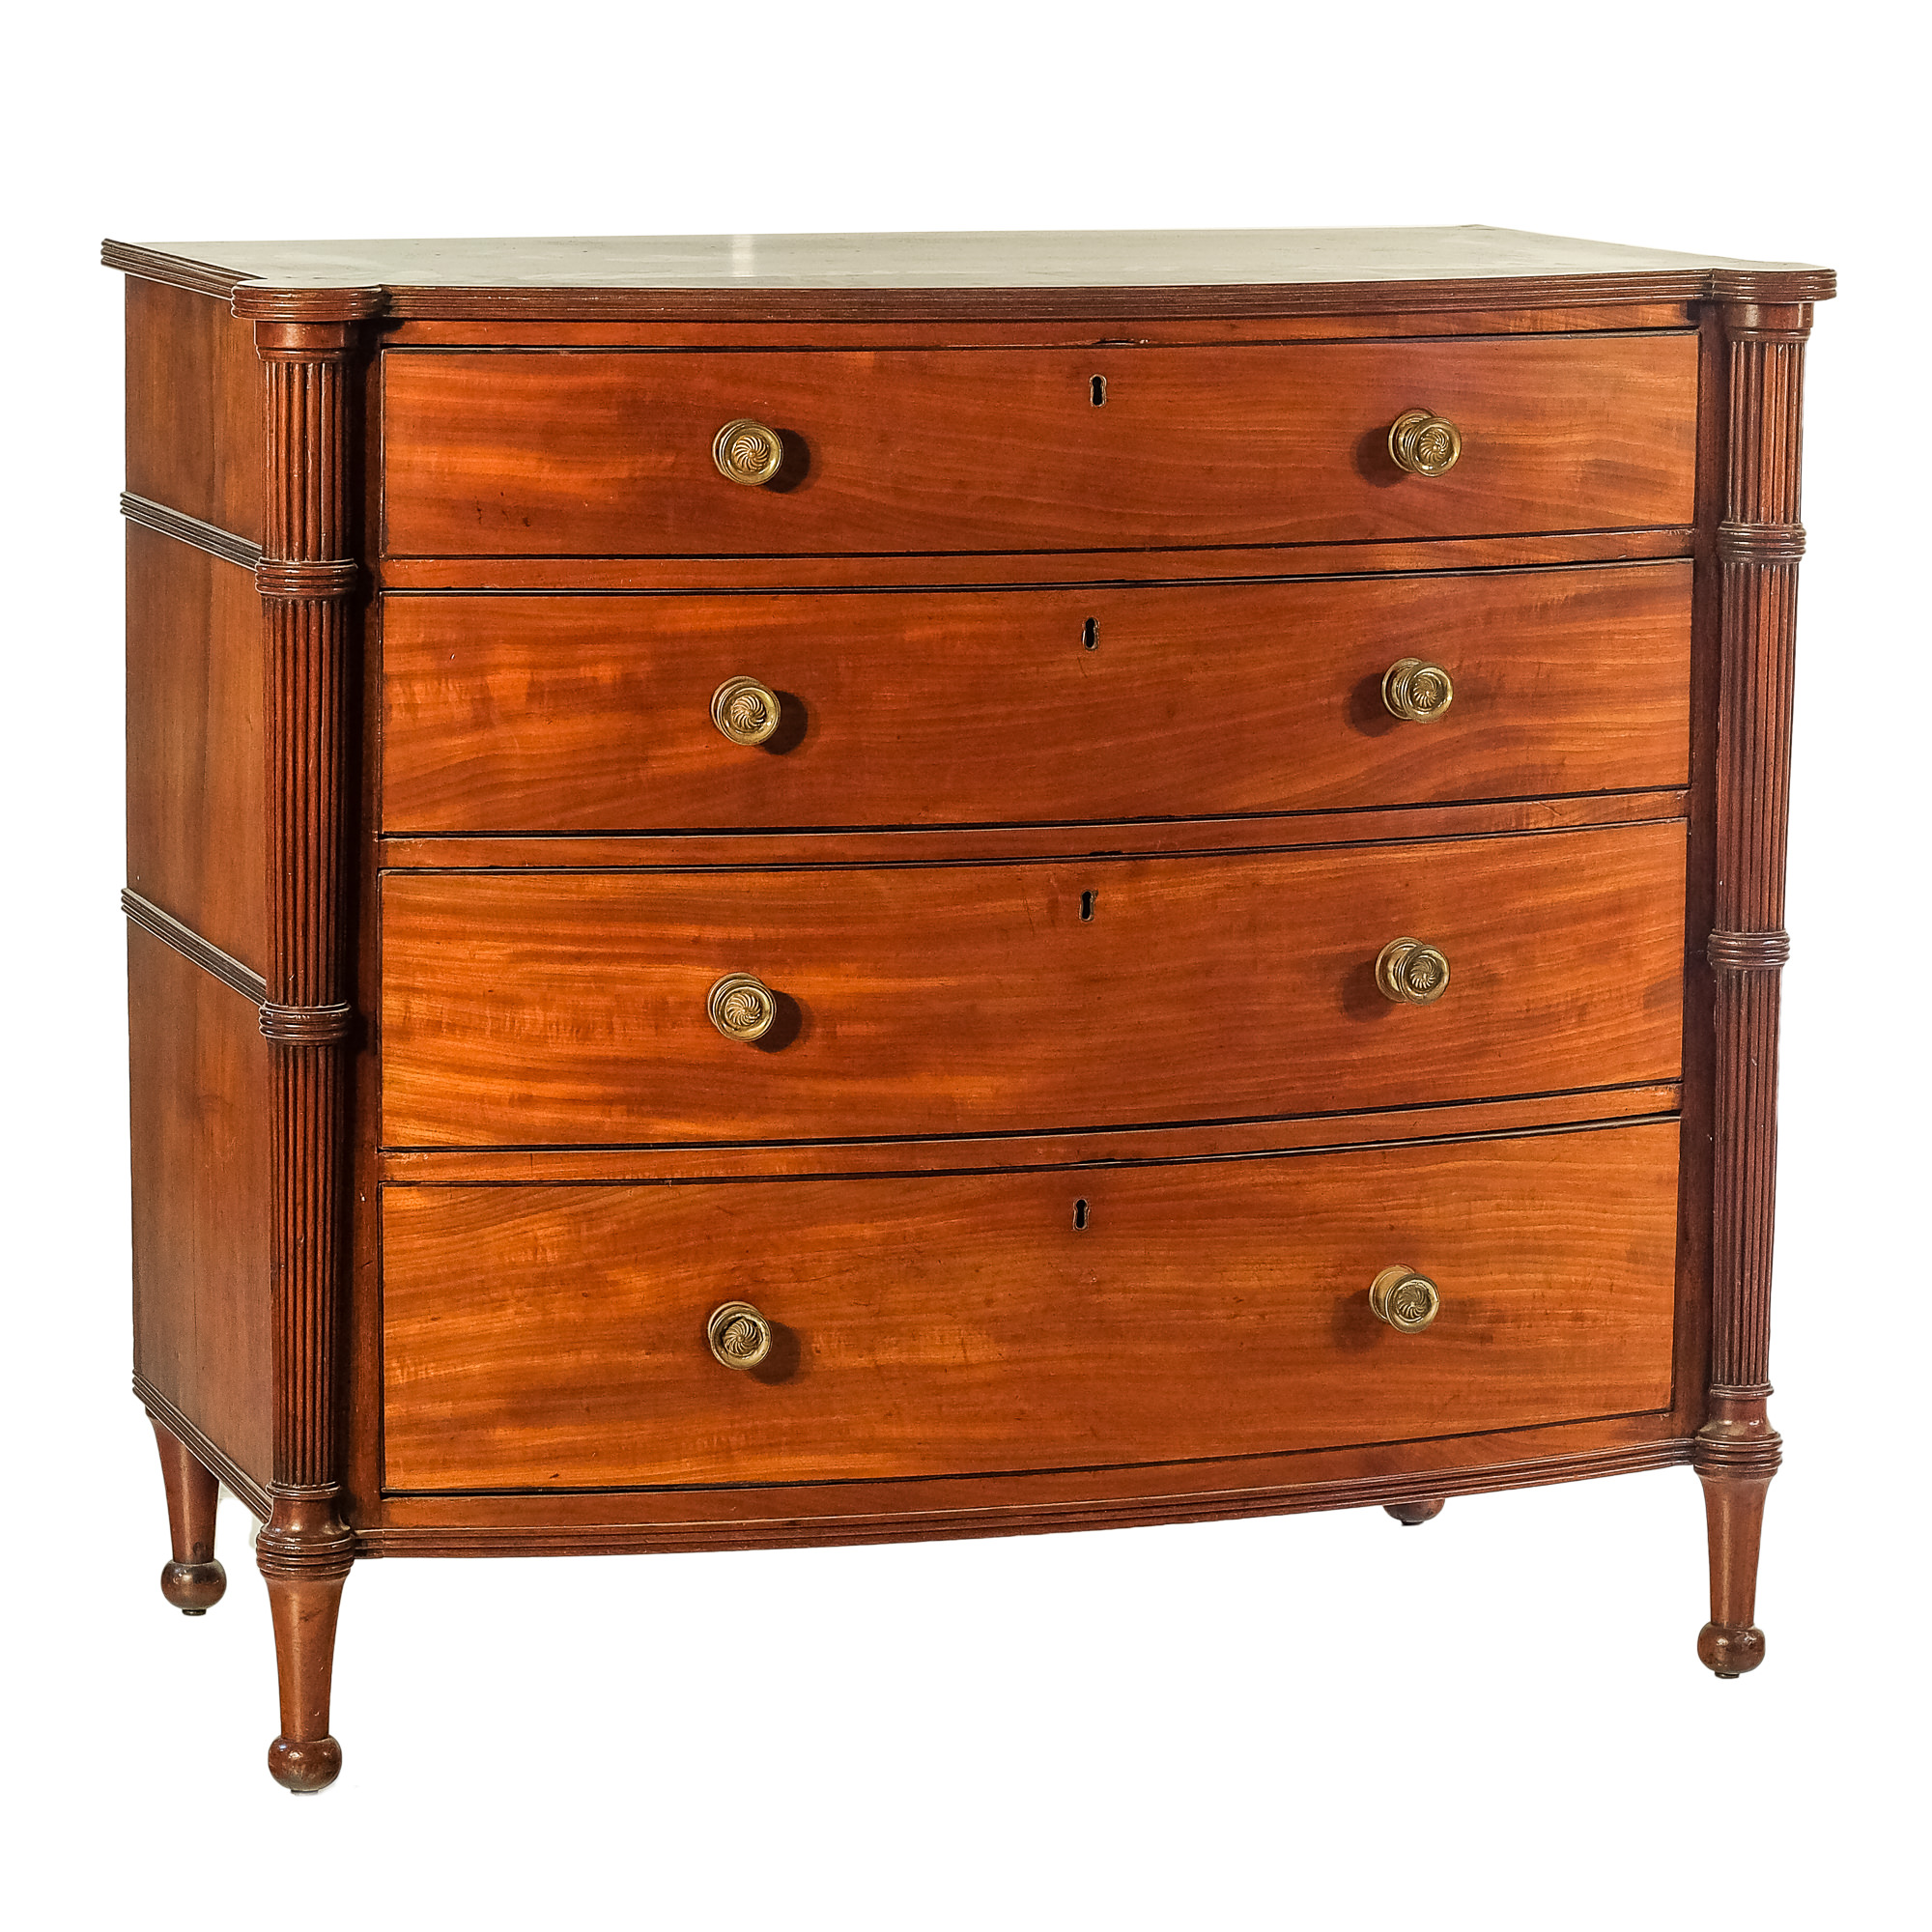 'Regency Period Mahogany Bowfront Chest of Drawers with Tapered Fluted Pilasters in the Manner of Gillows Circa 1820'